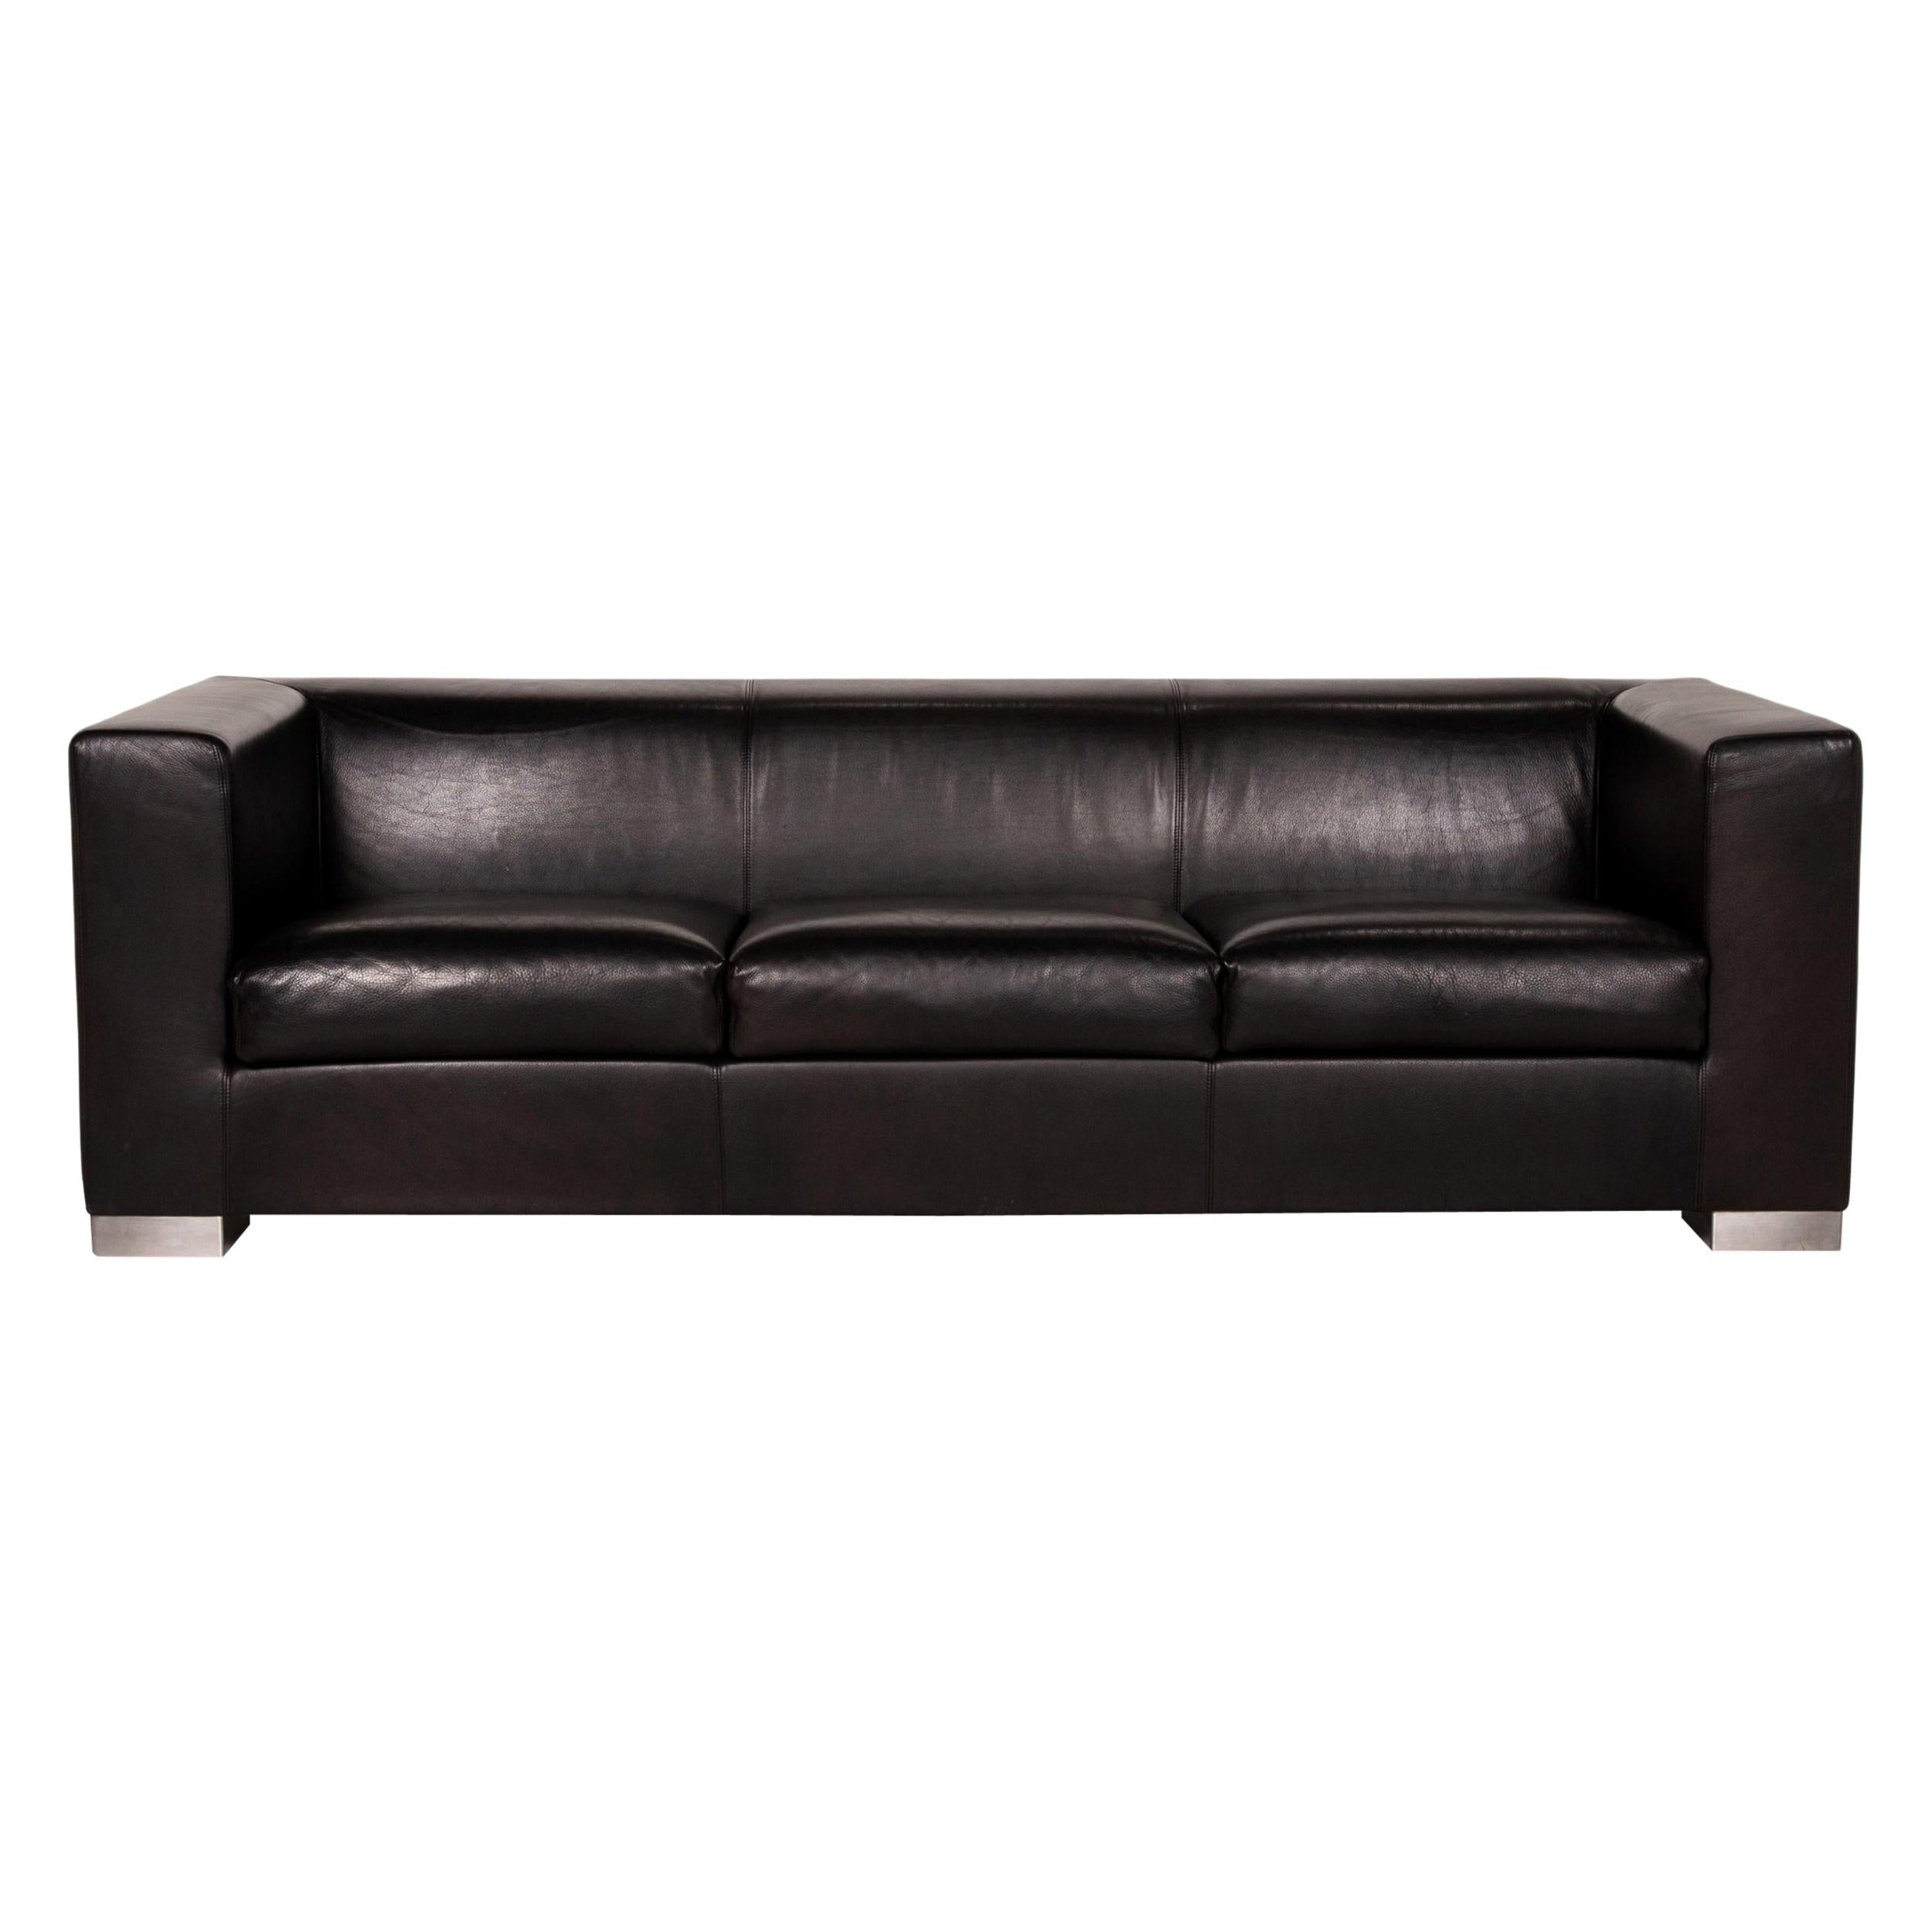 Wittmann Camin Leather Sofa Black Three-Seater Couch